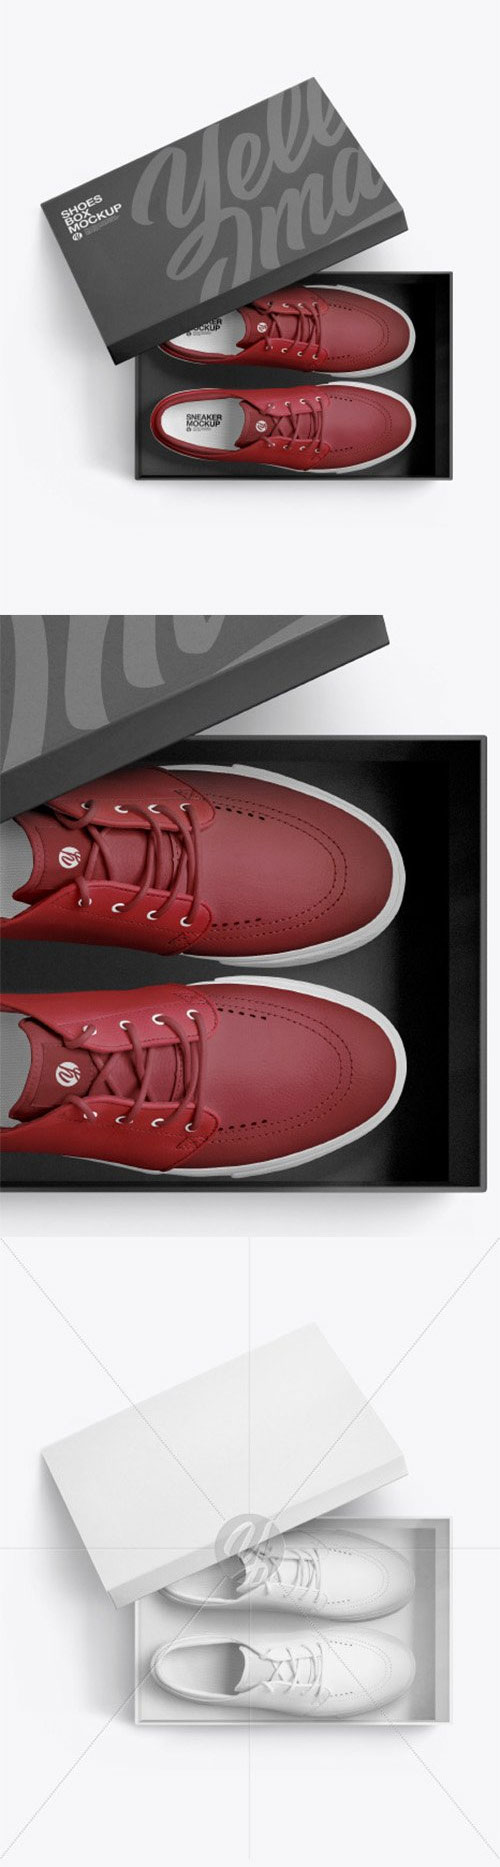 Sneakers Shoes w/ Box Mockup 60996